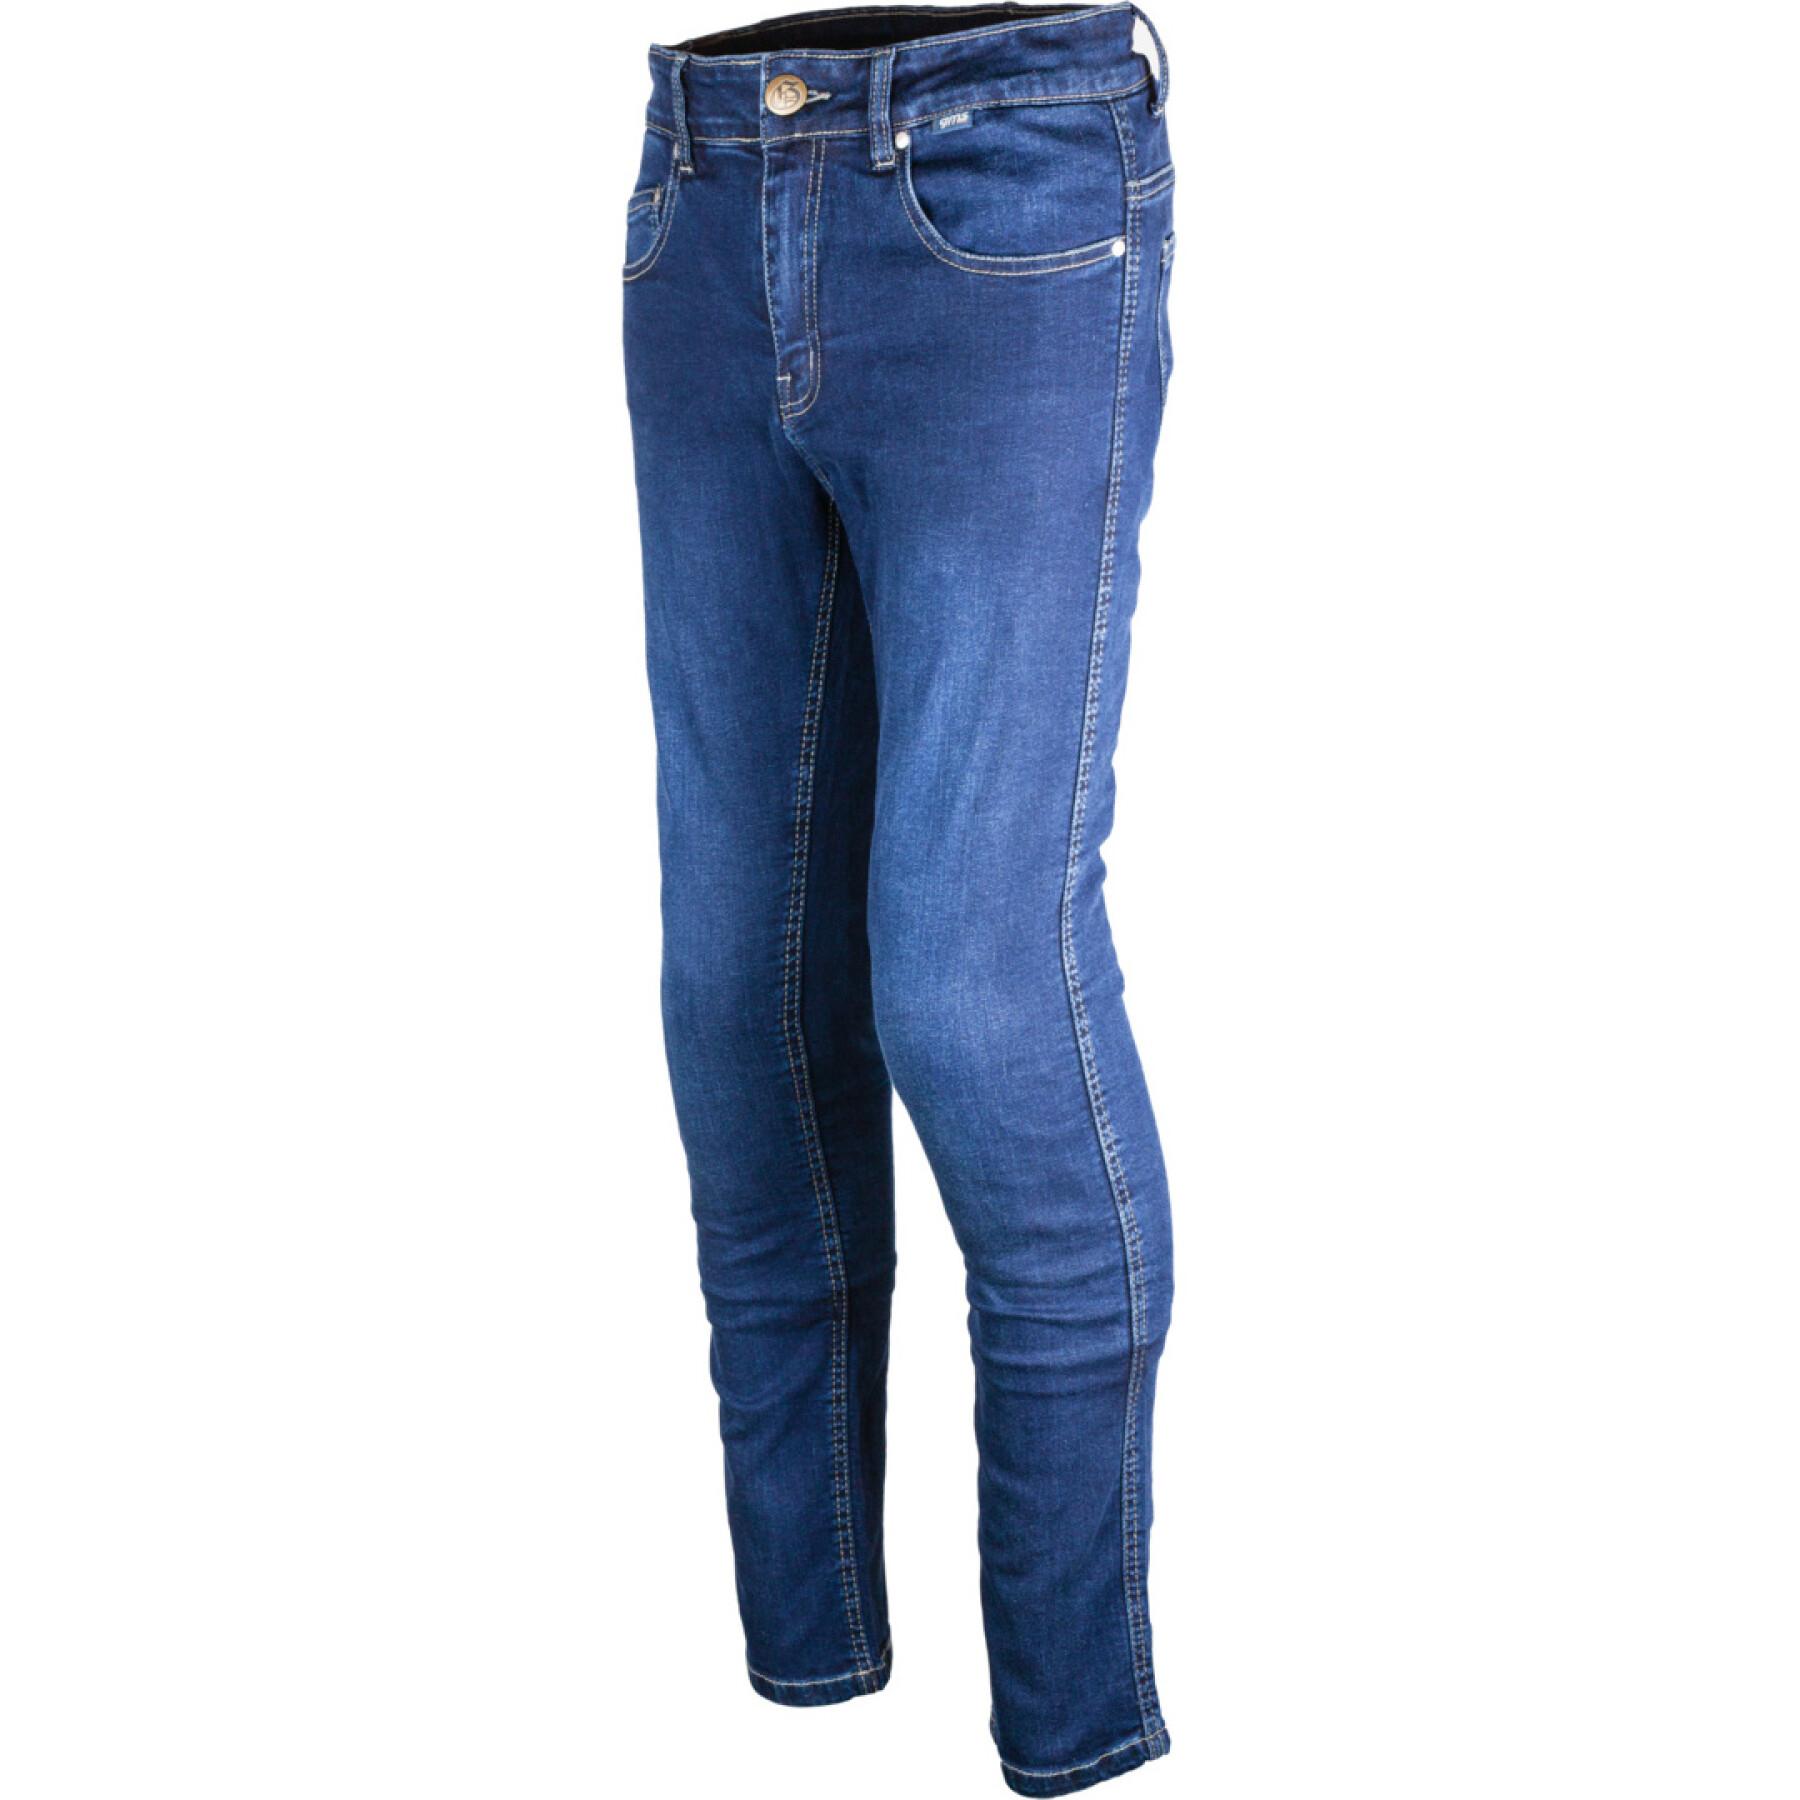 Motorcycle jeans woman GMS rattle